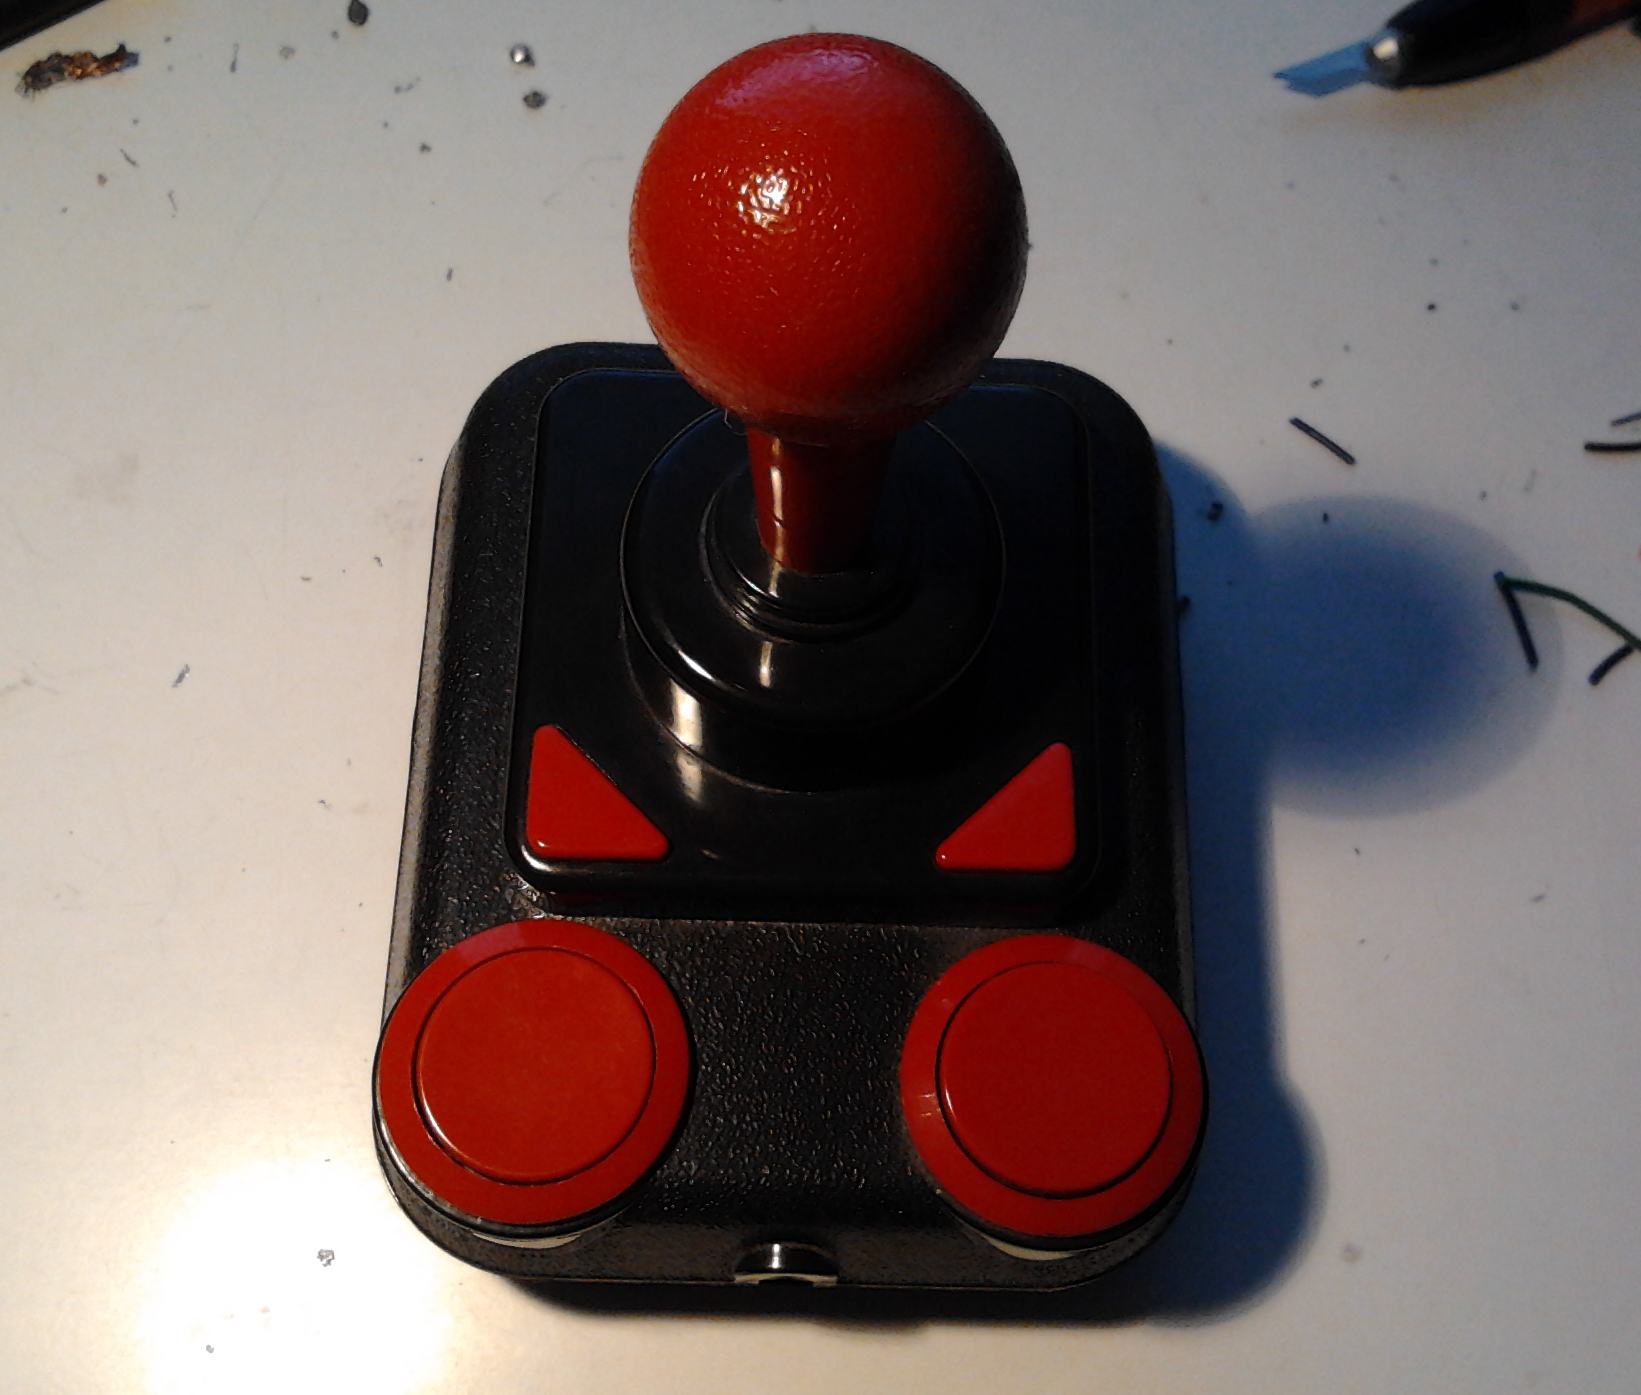 Modification of retrolink USB joypad to for NES and famiclones [with RGB  LEDs] - nesdev.org